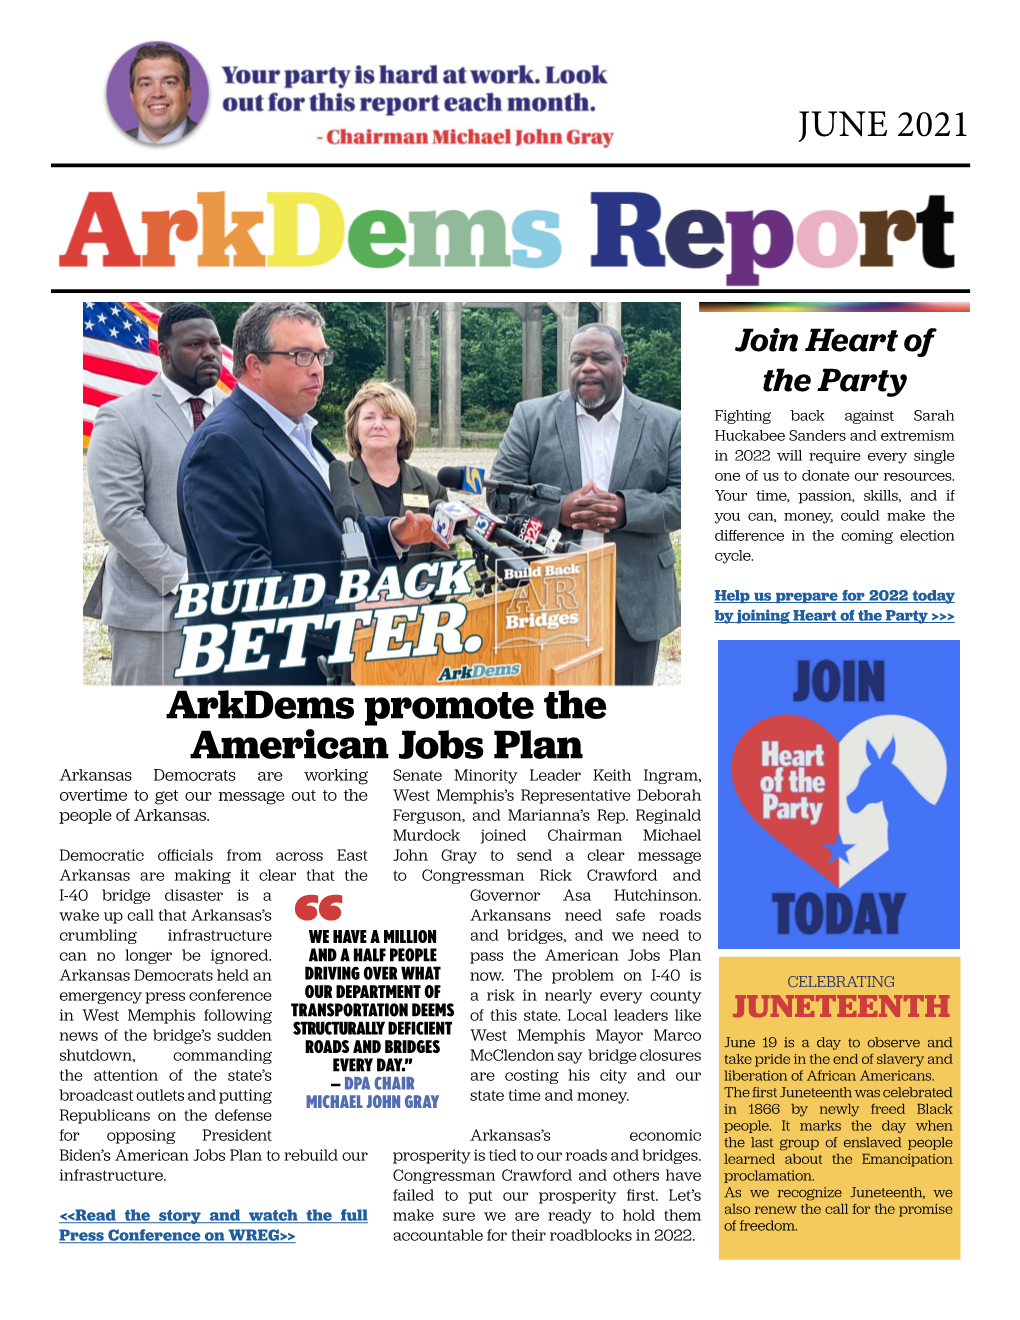 Arkdems Promote the American Jobs Plan